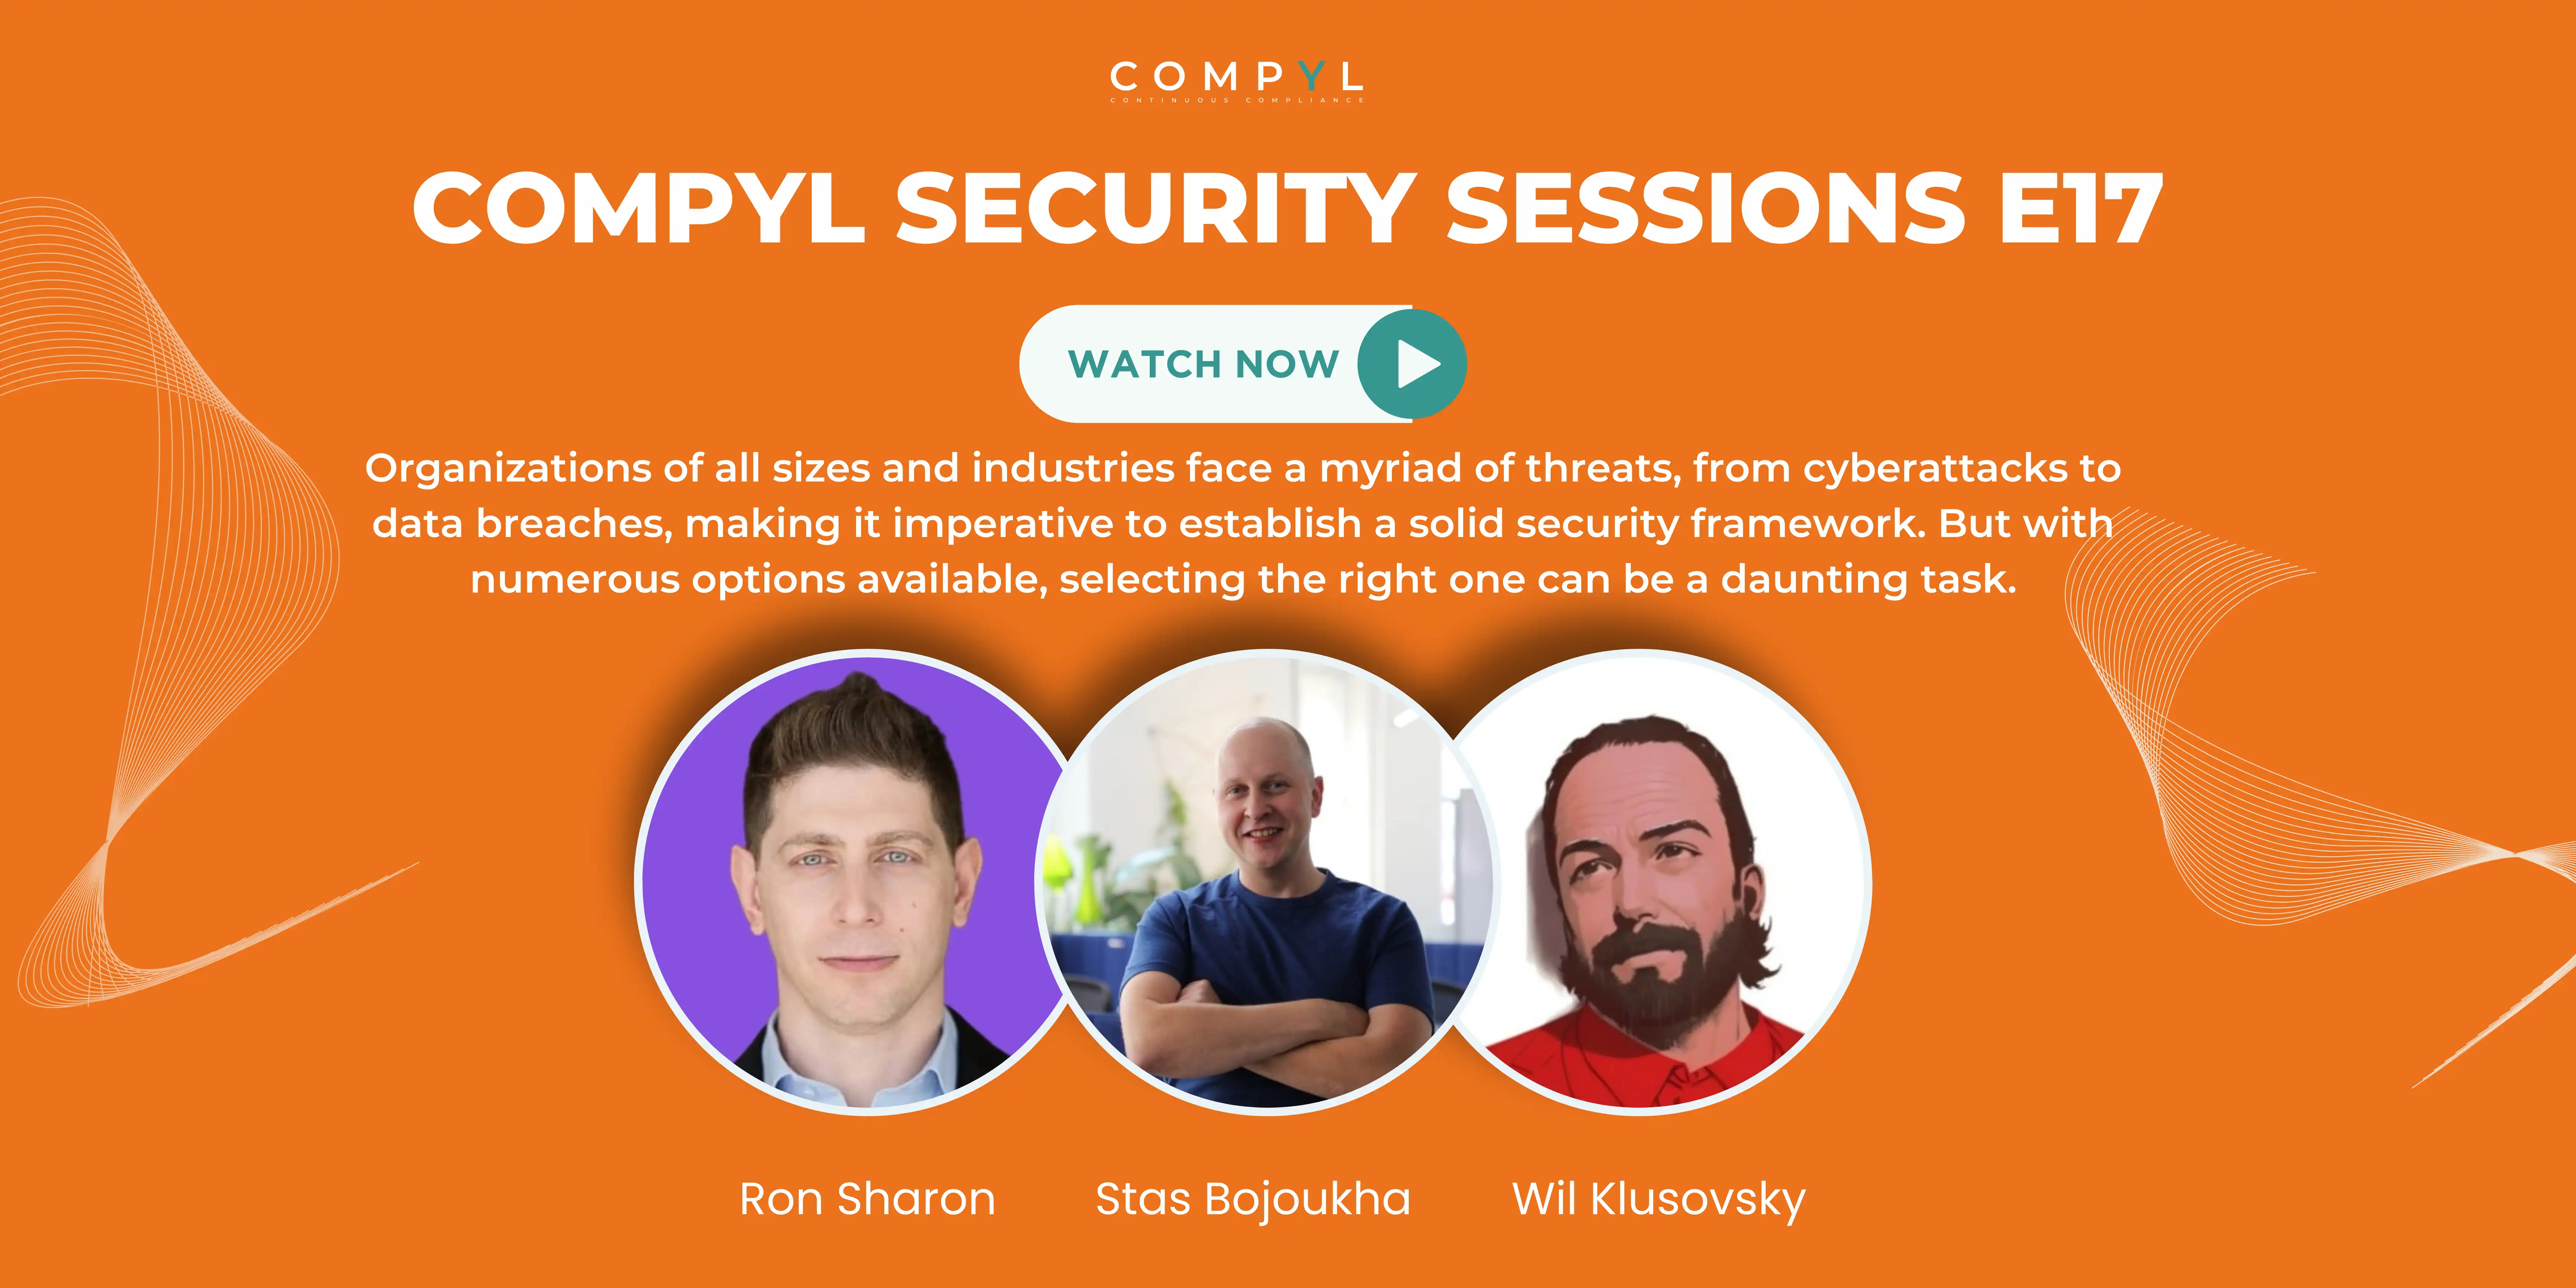 Compyl Security Sessions E17